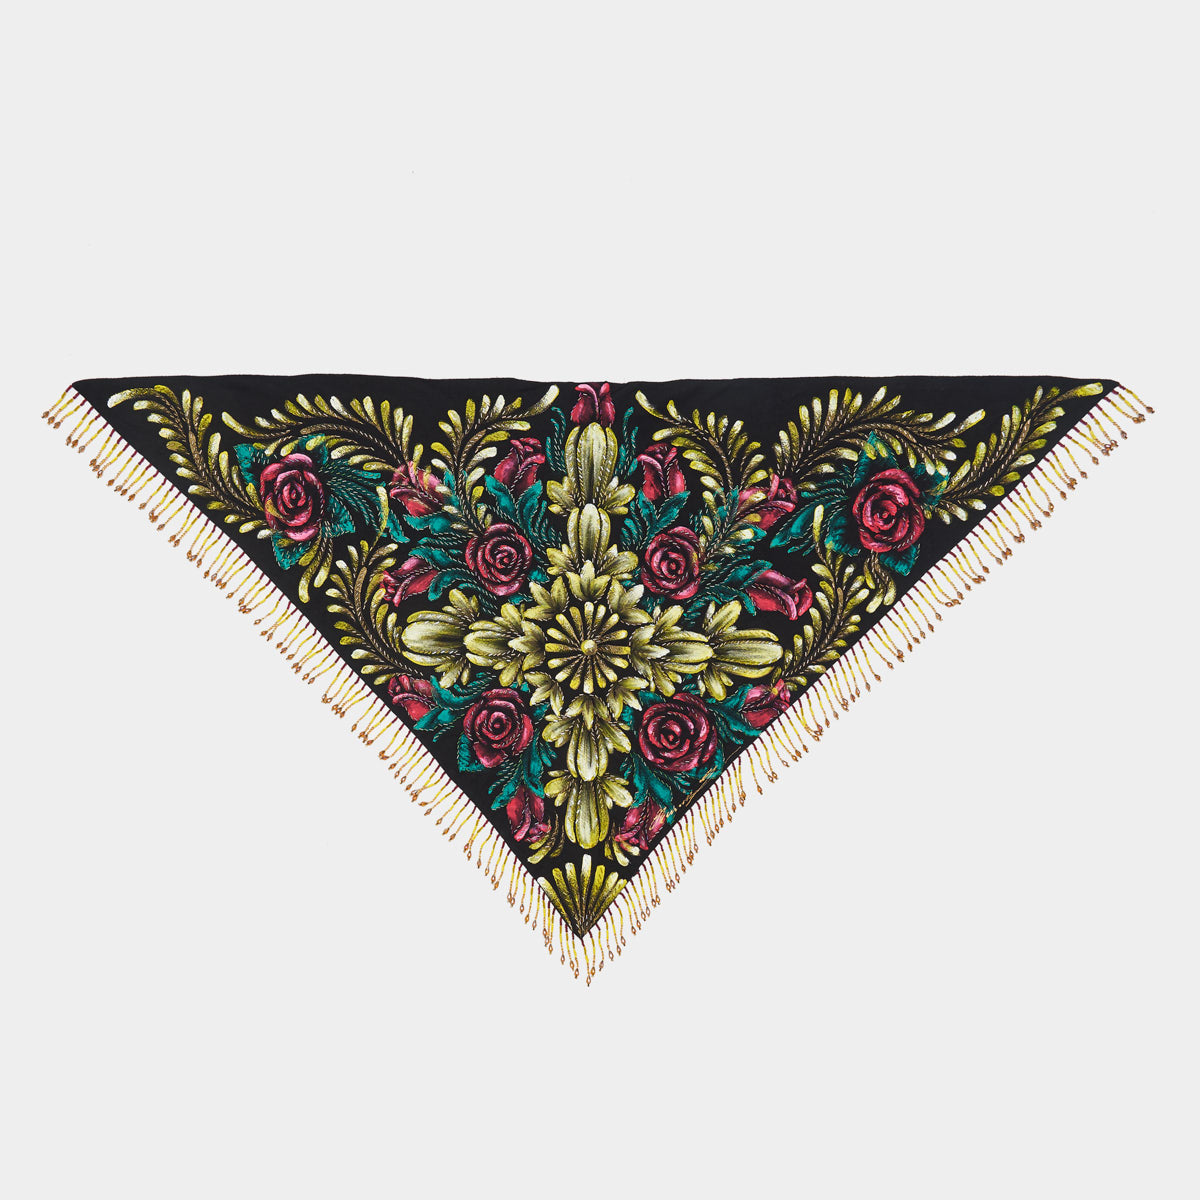 HAND-PAINTED AND HAND-EMBROIDERED TRIANGULAR SHAWL WITH BEADED FRINGE